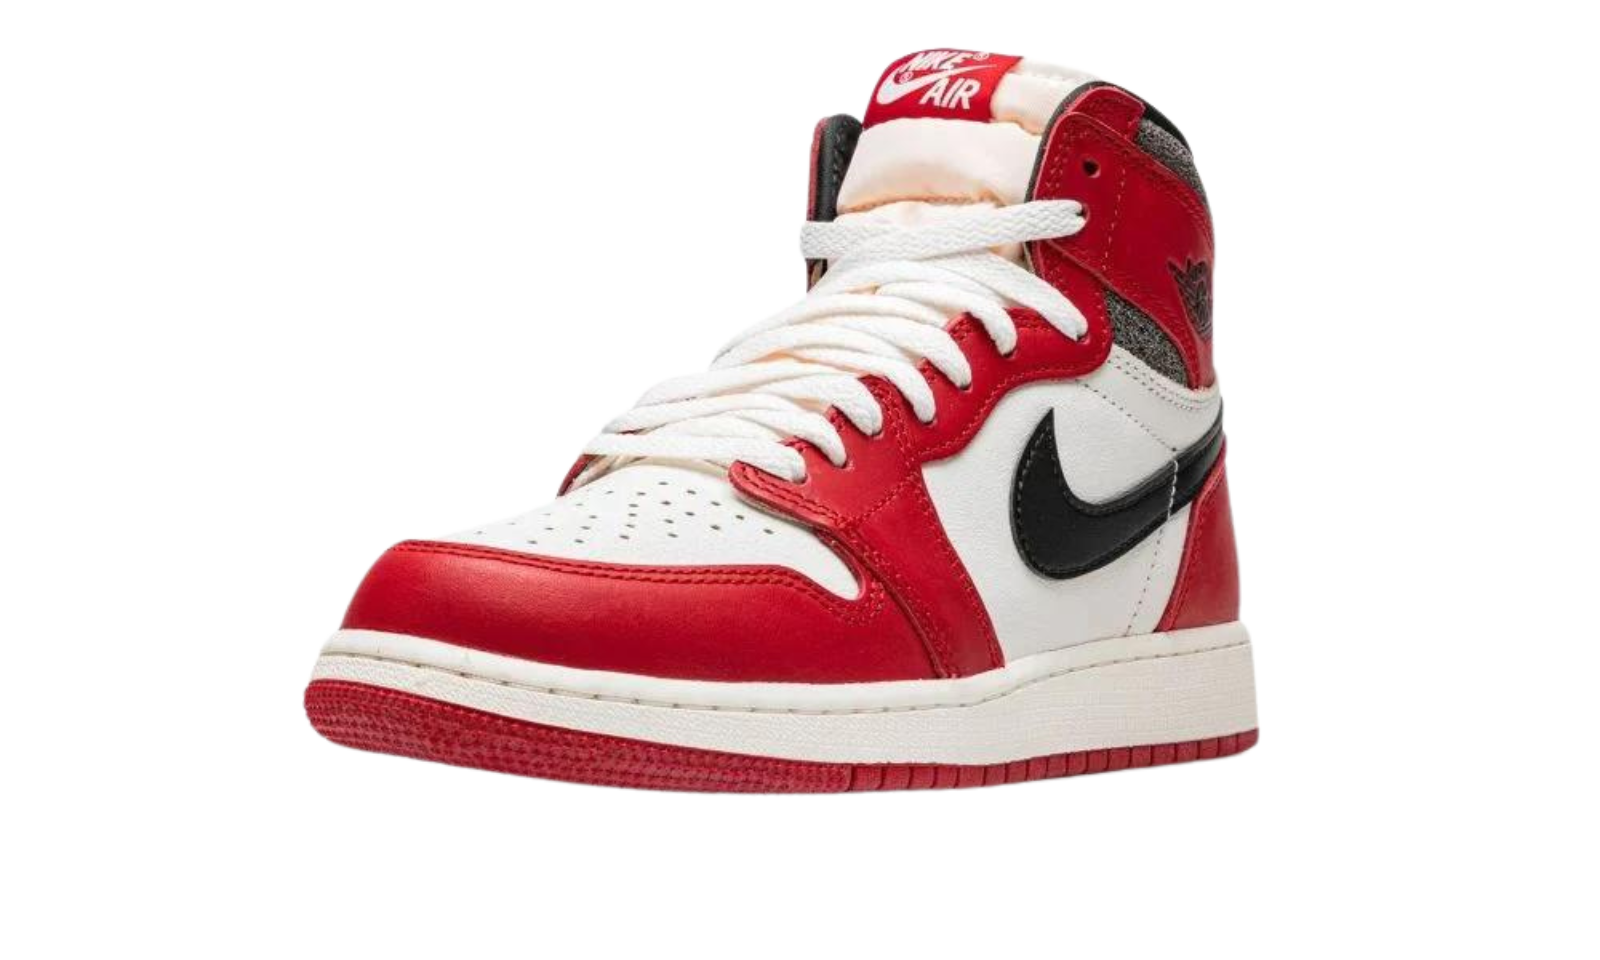 Air Jordan 1 High Chicago Lost and Founds